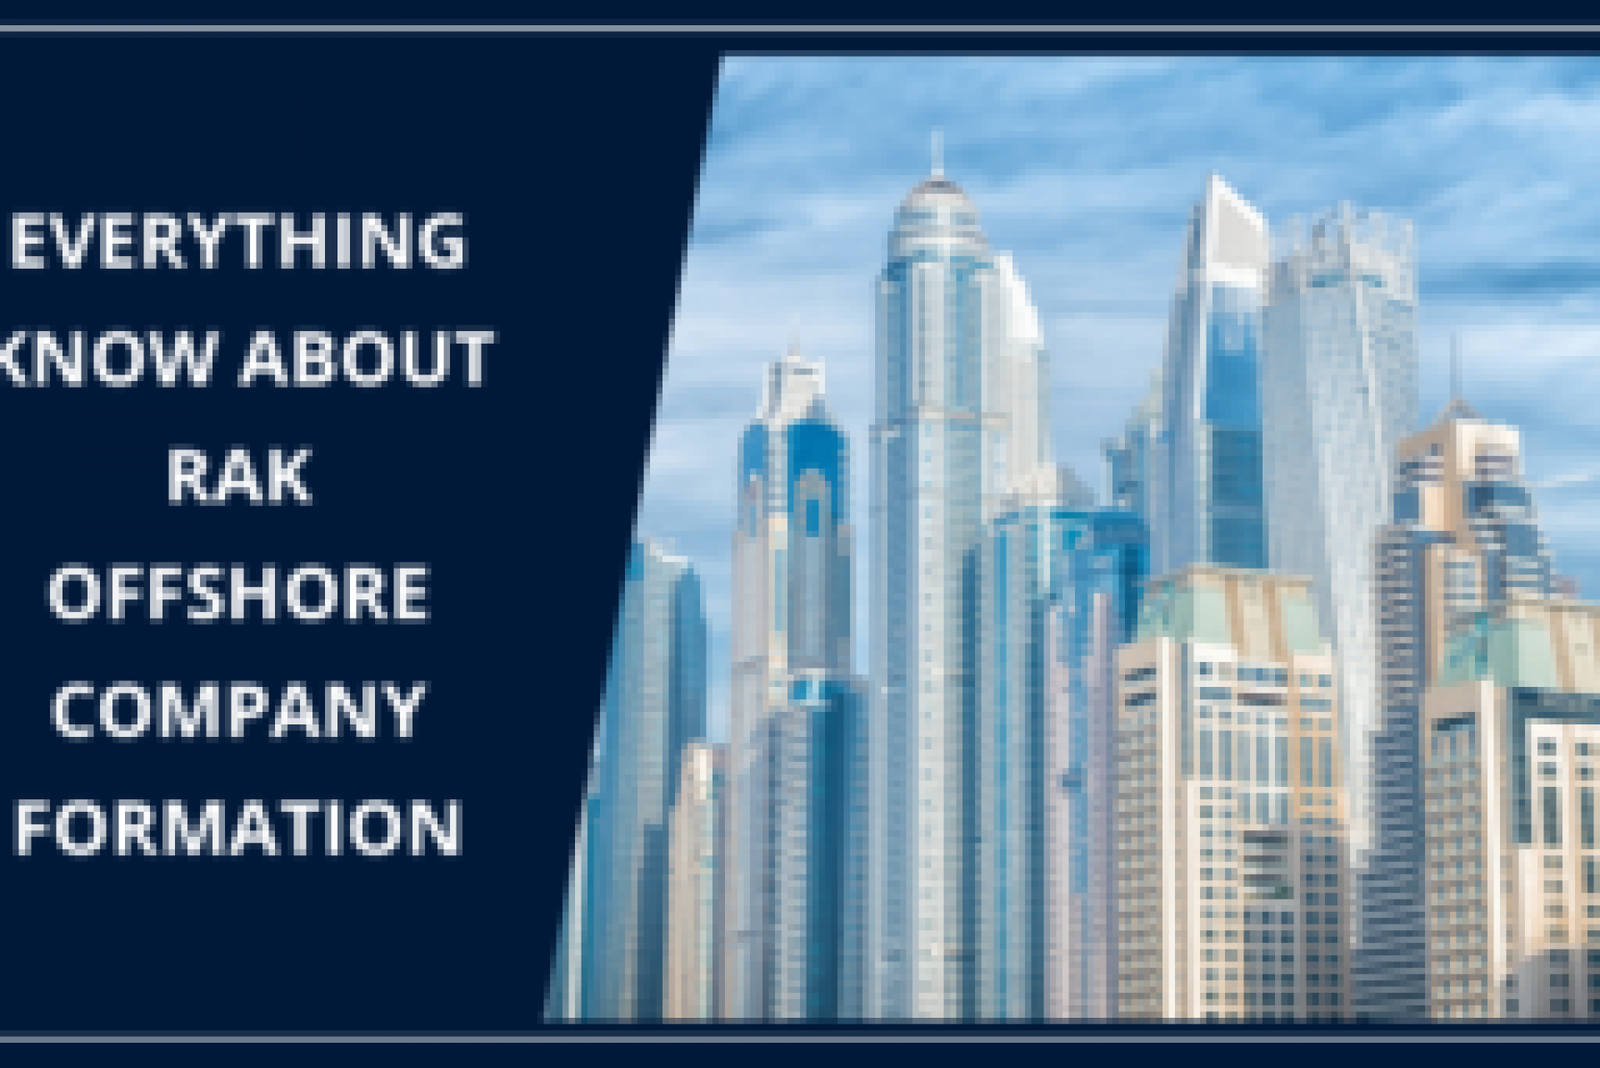 Everything-Know-about-RAK-Offshore-Company-Formation